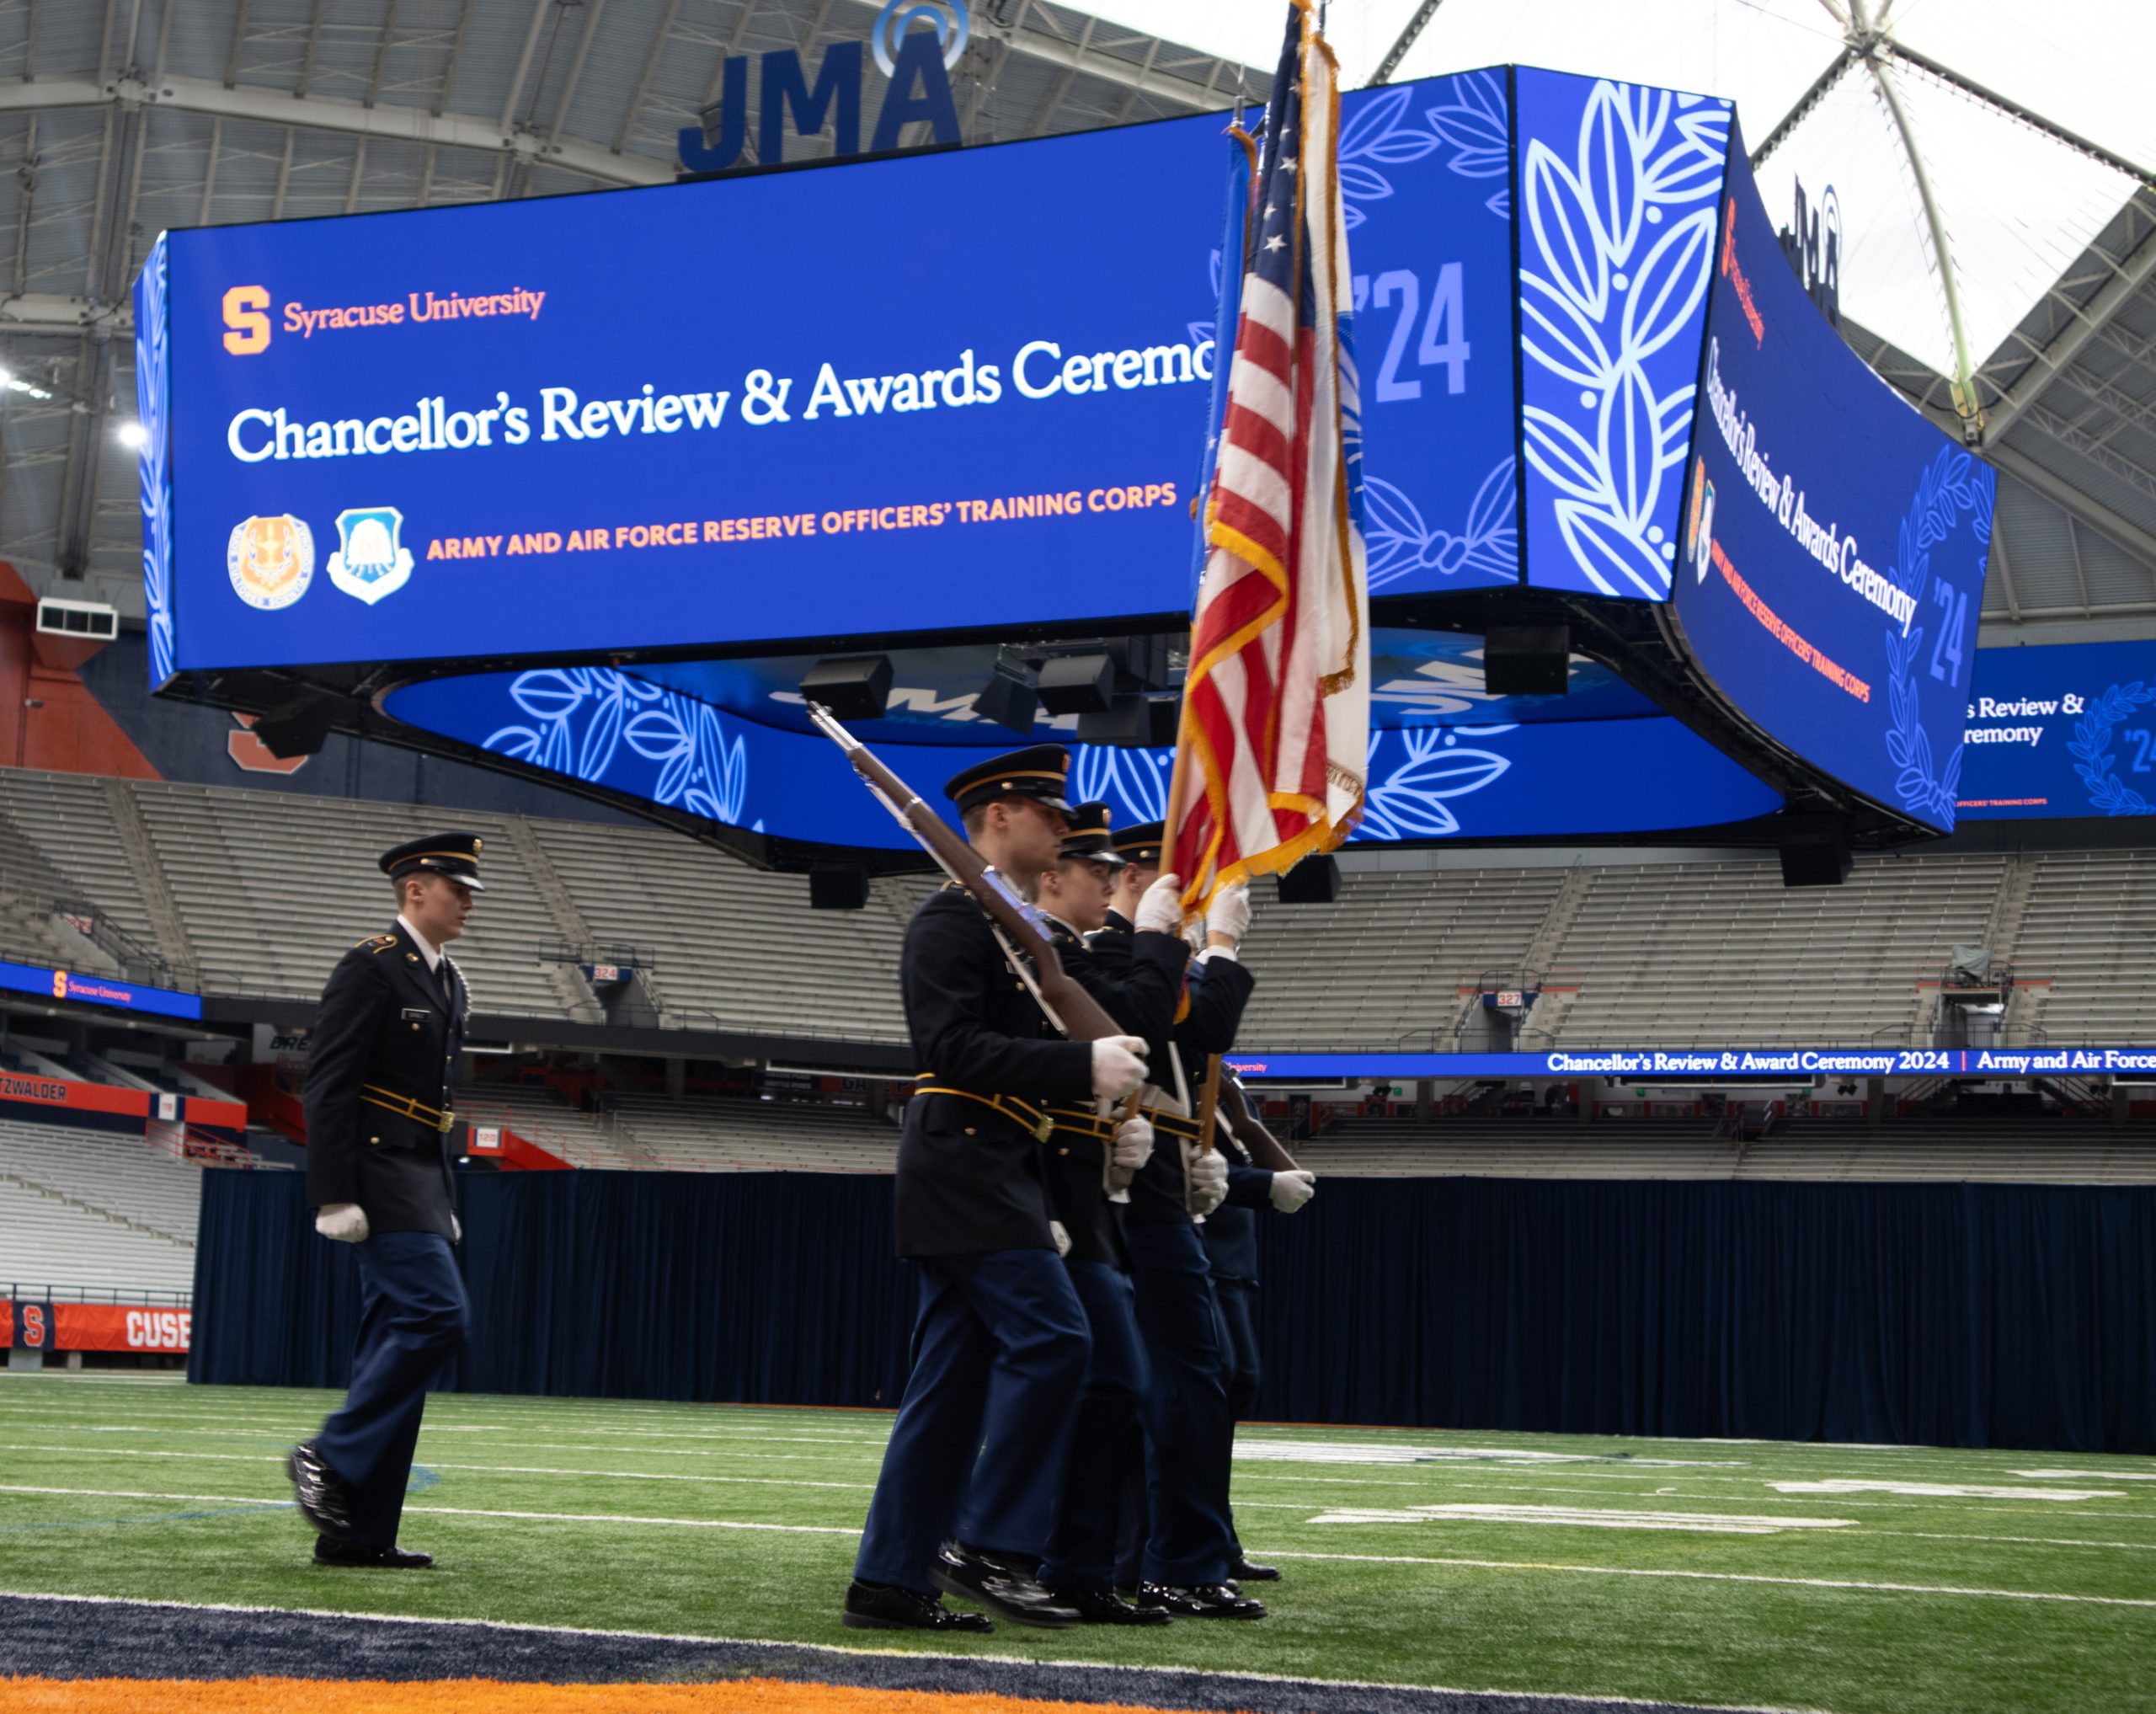 U.S. Army and U.S. Air Force ROTC Color Guard marching across the field in the Dome.